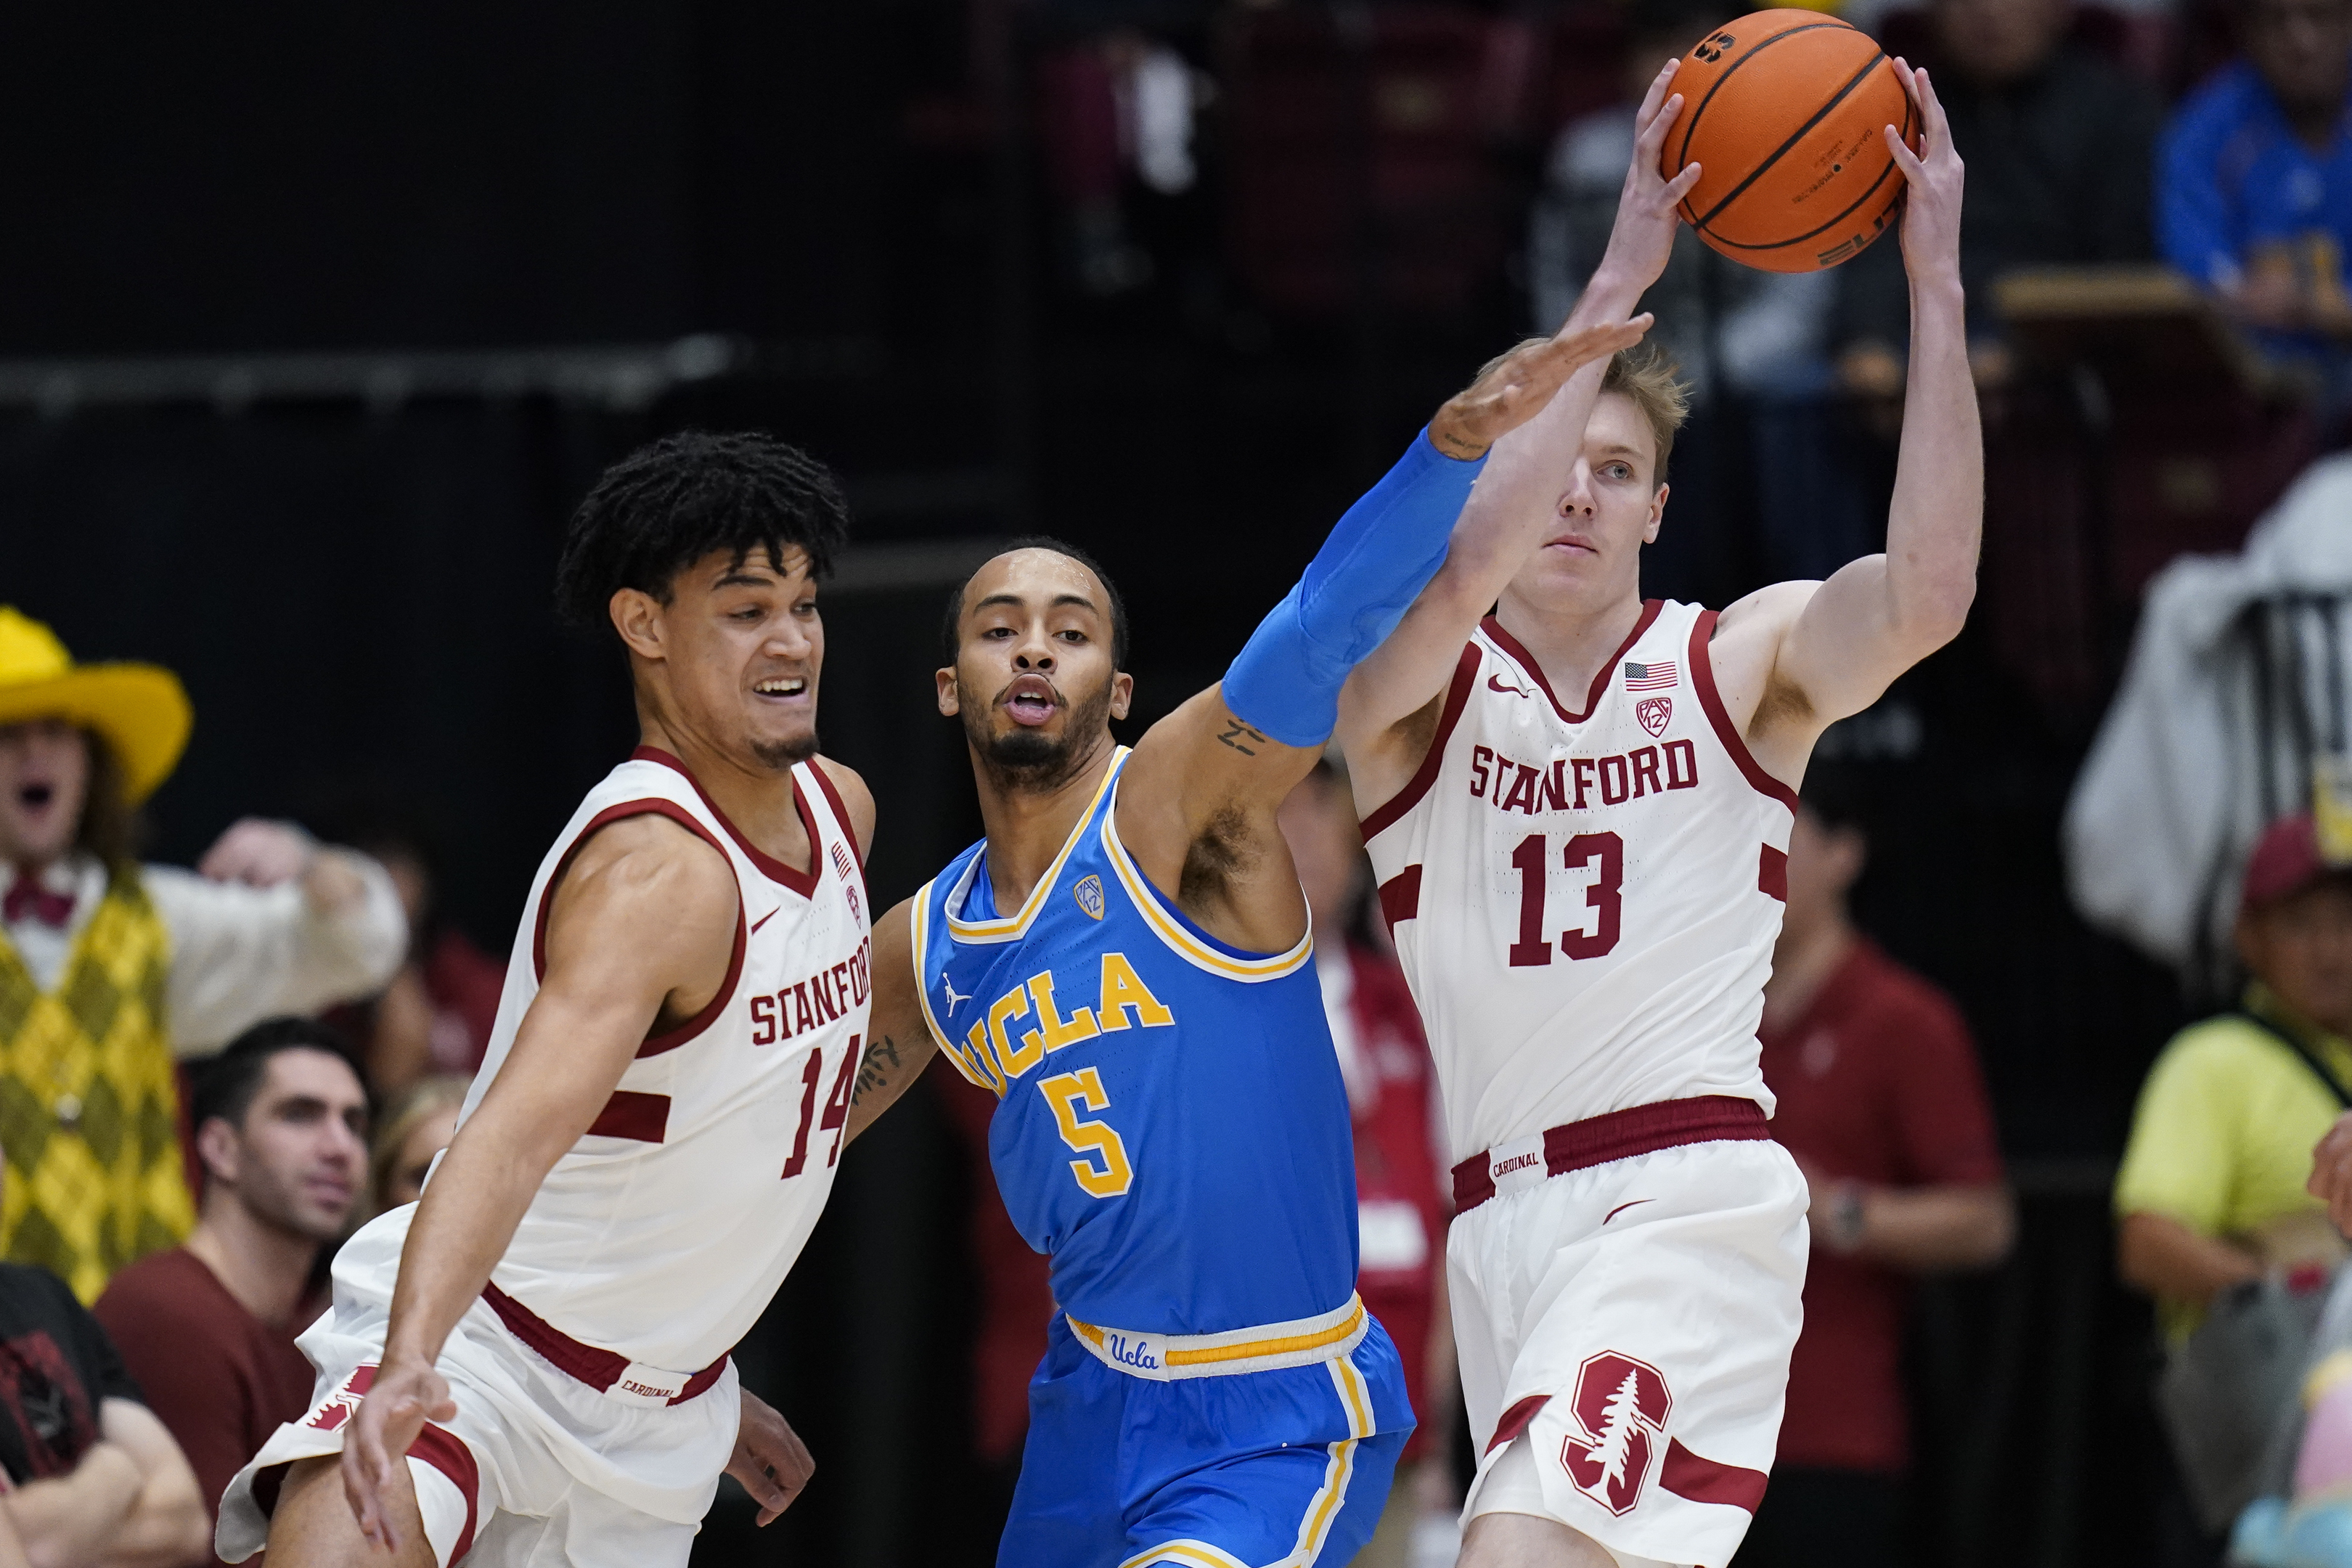 Jaime Jaquez Jr., UCLA hold off Stanford to win Pac-12 opener